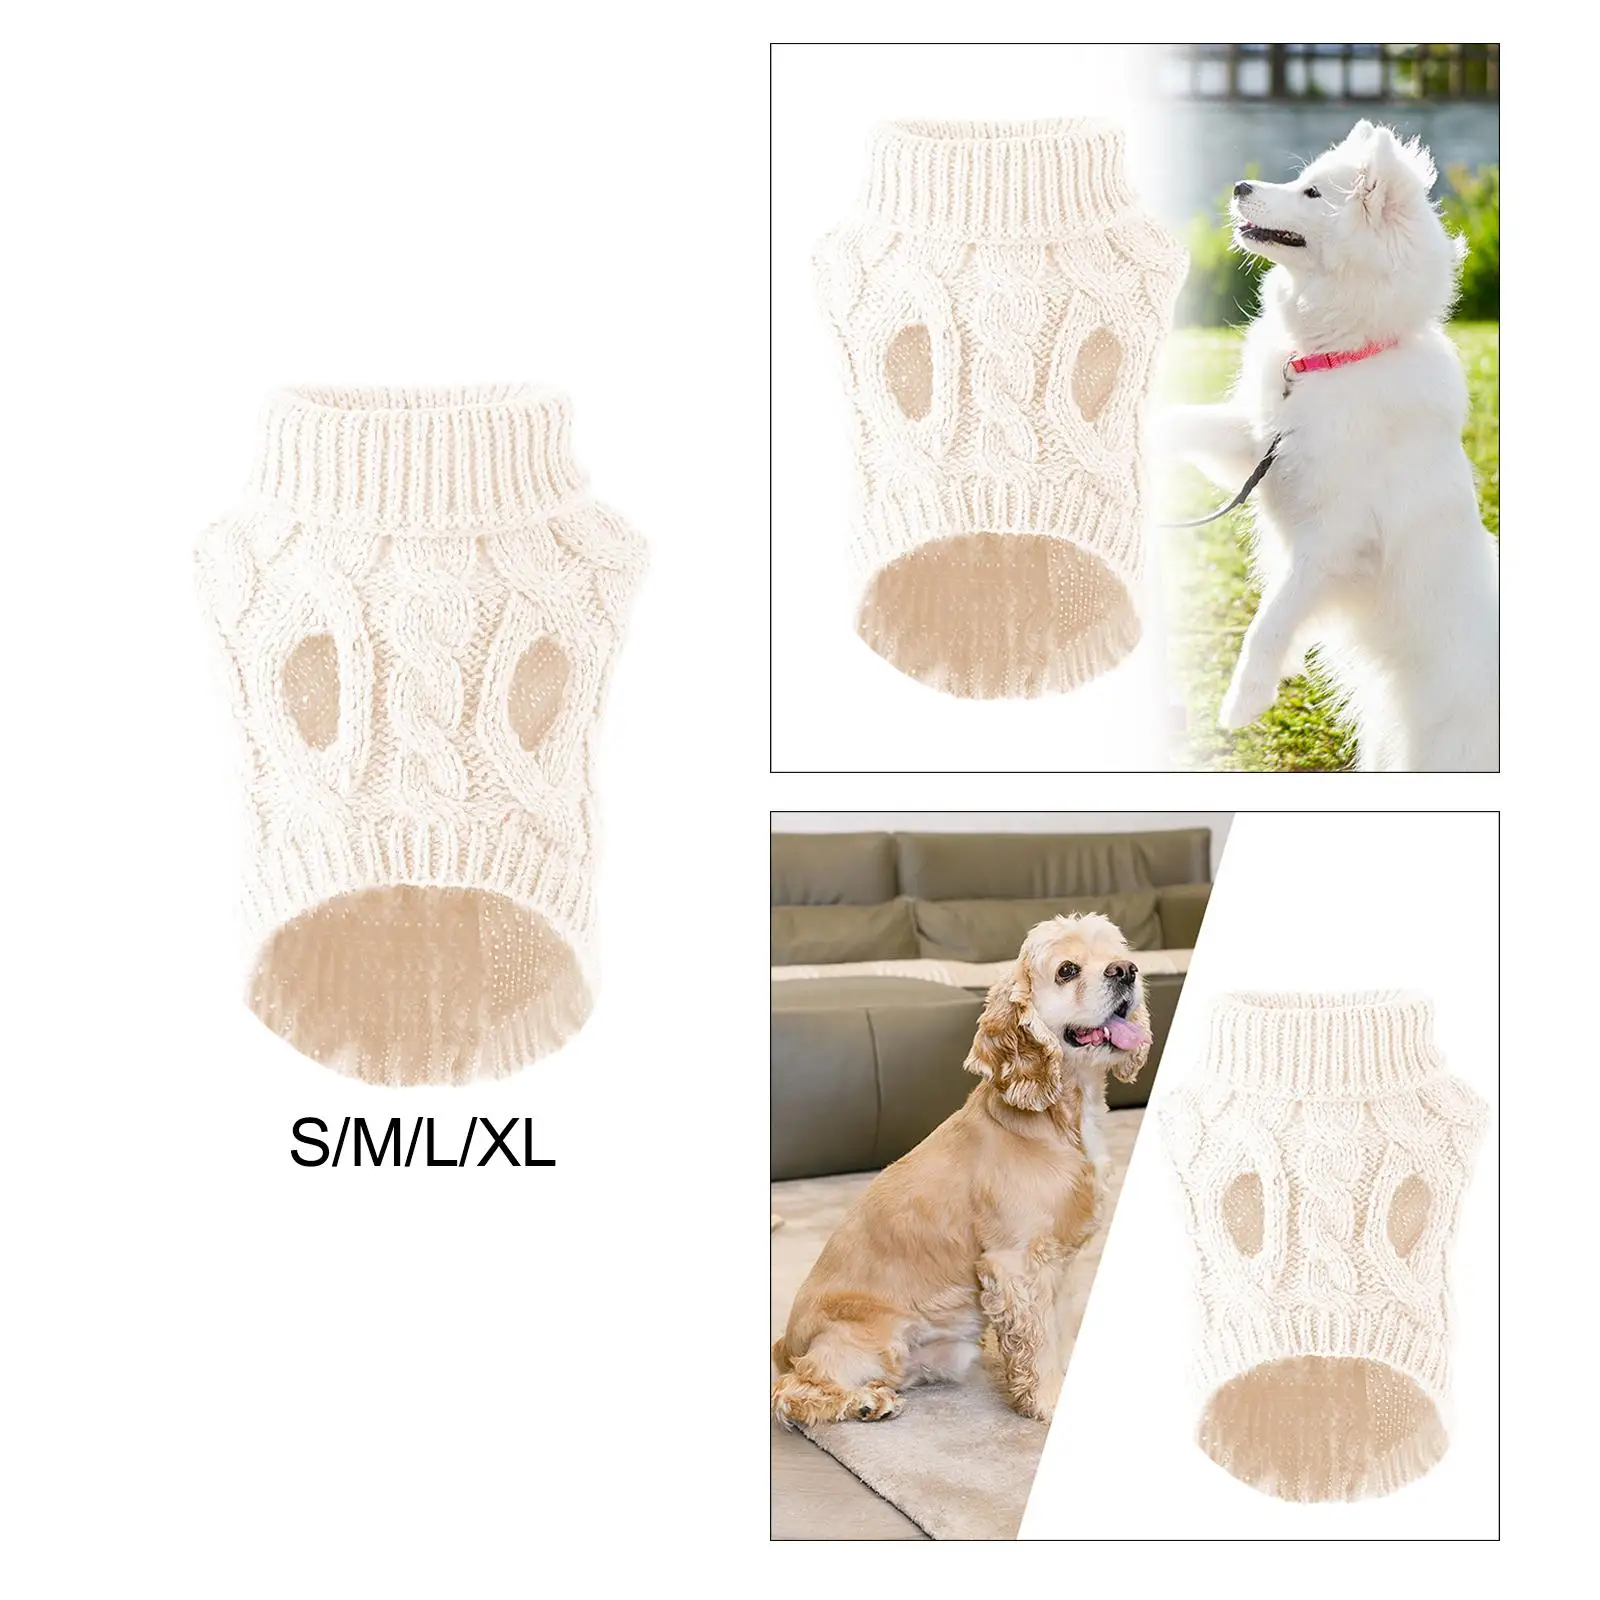 Dog Winter Sweater Training Warm Hiking Soft Comfortable Knit Puppy Sweater Knitted Pet Puppy Clothes for Small Medium Dogs Cats